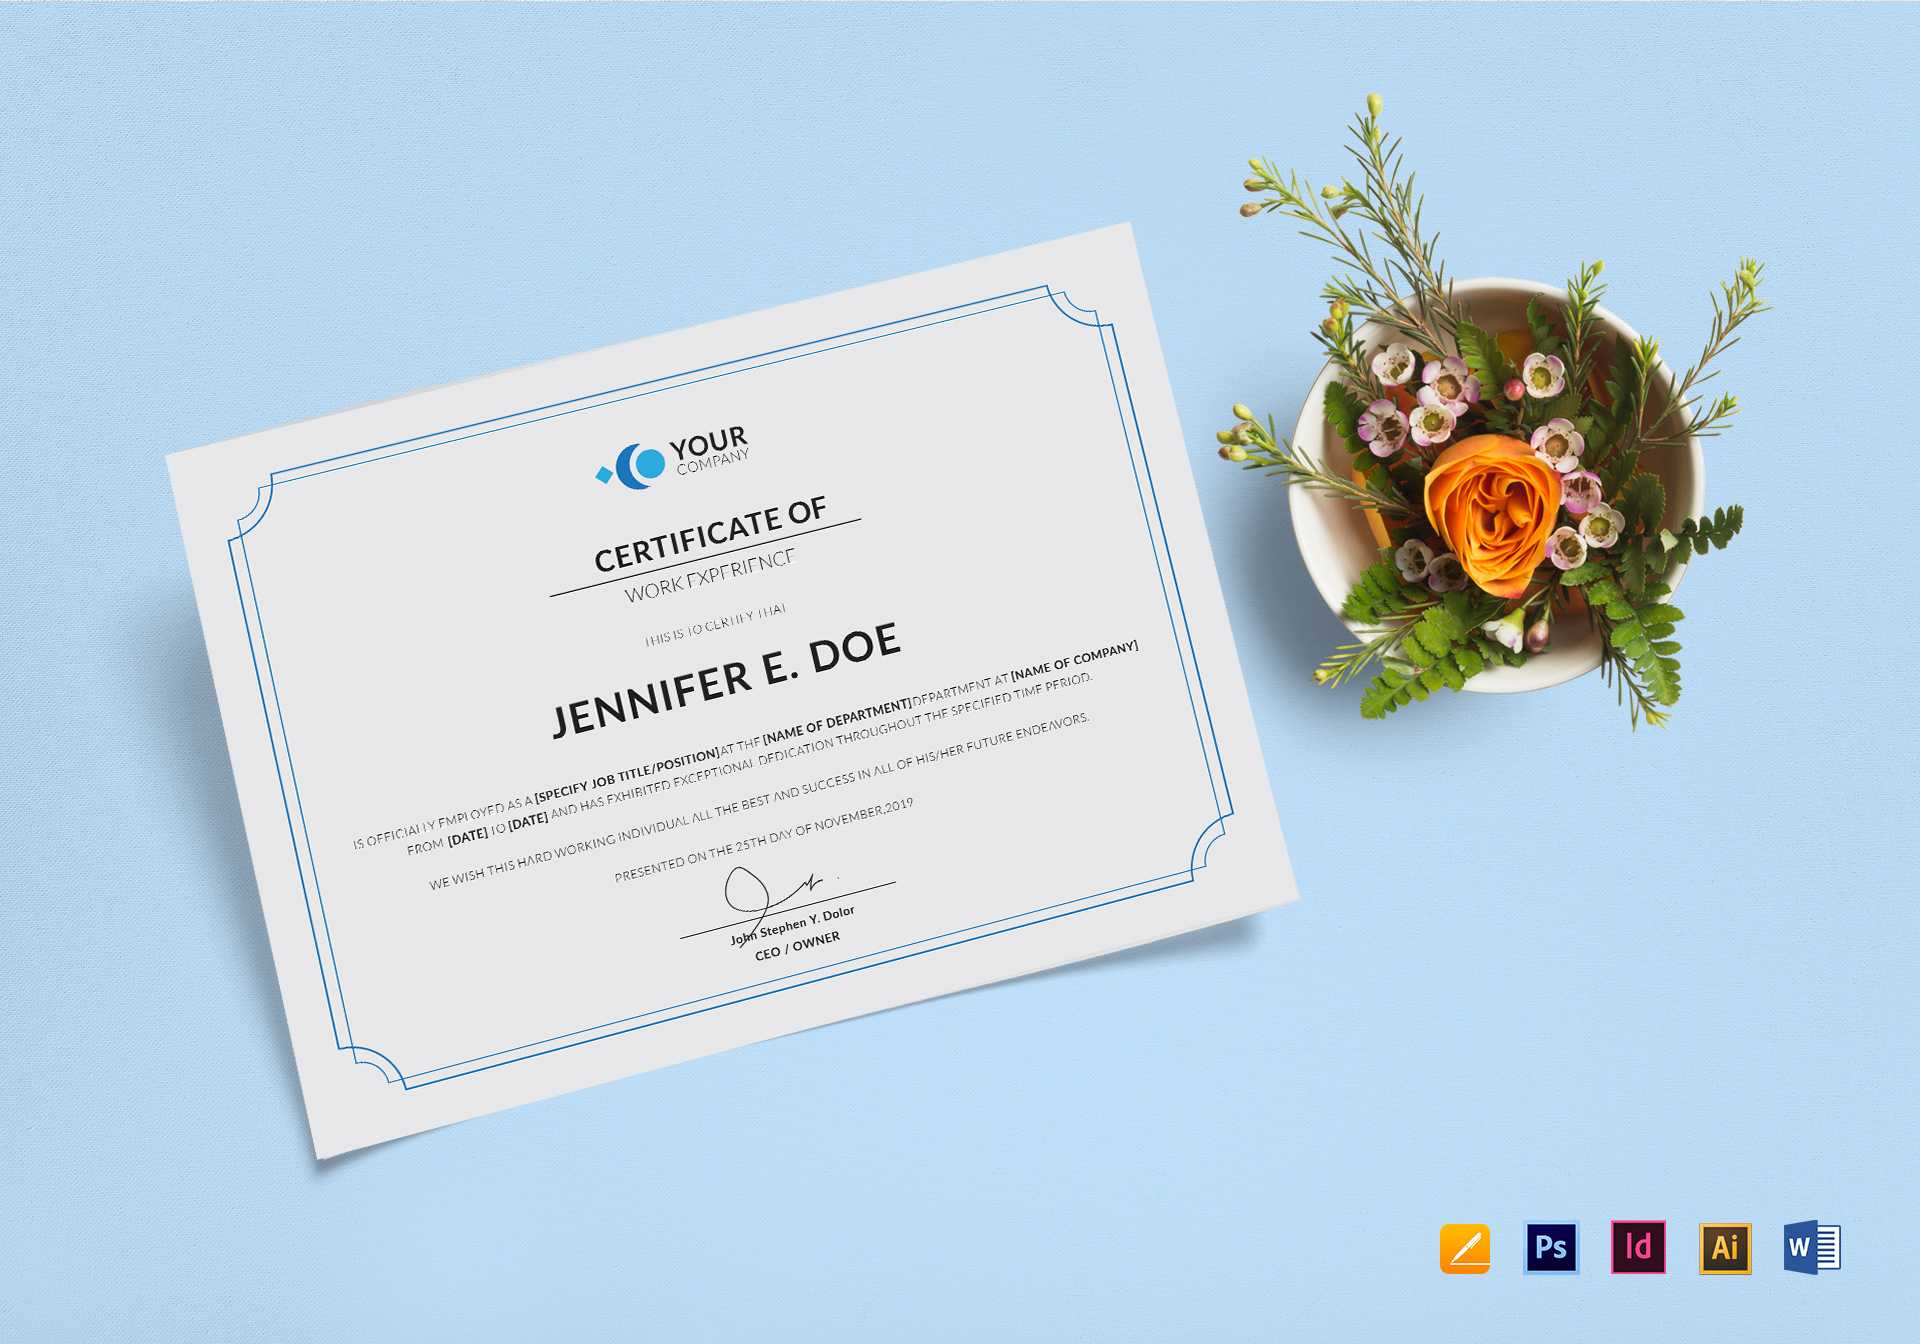 Work Experience Certificate Template Inside Pages Certificate Templates